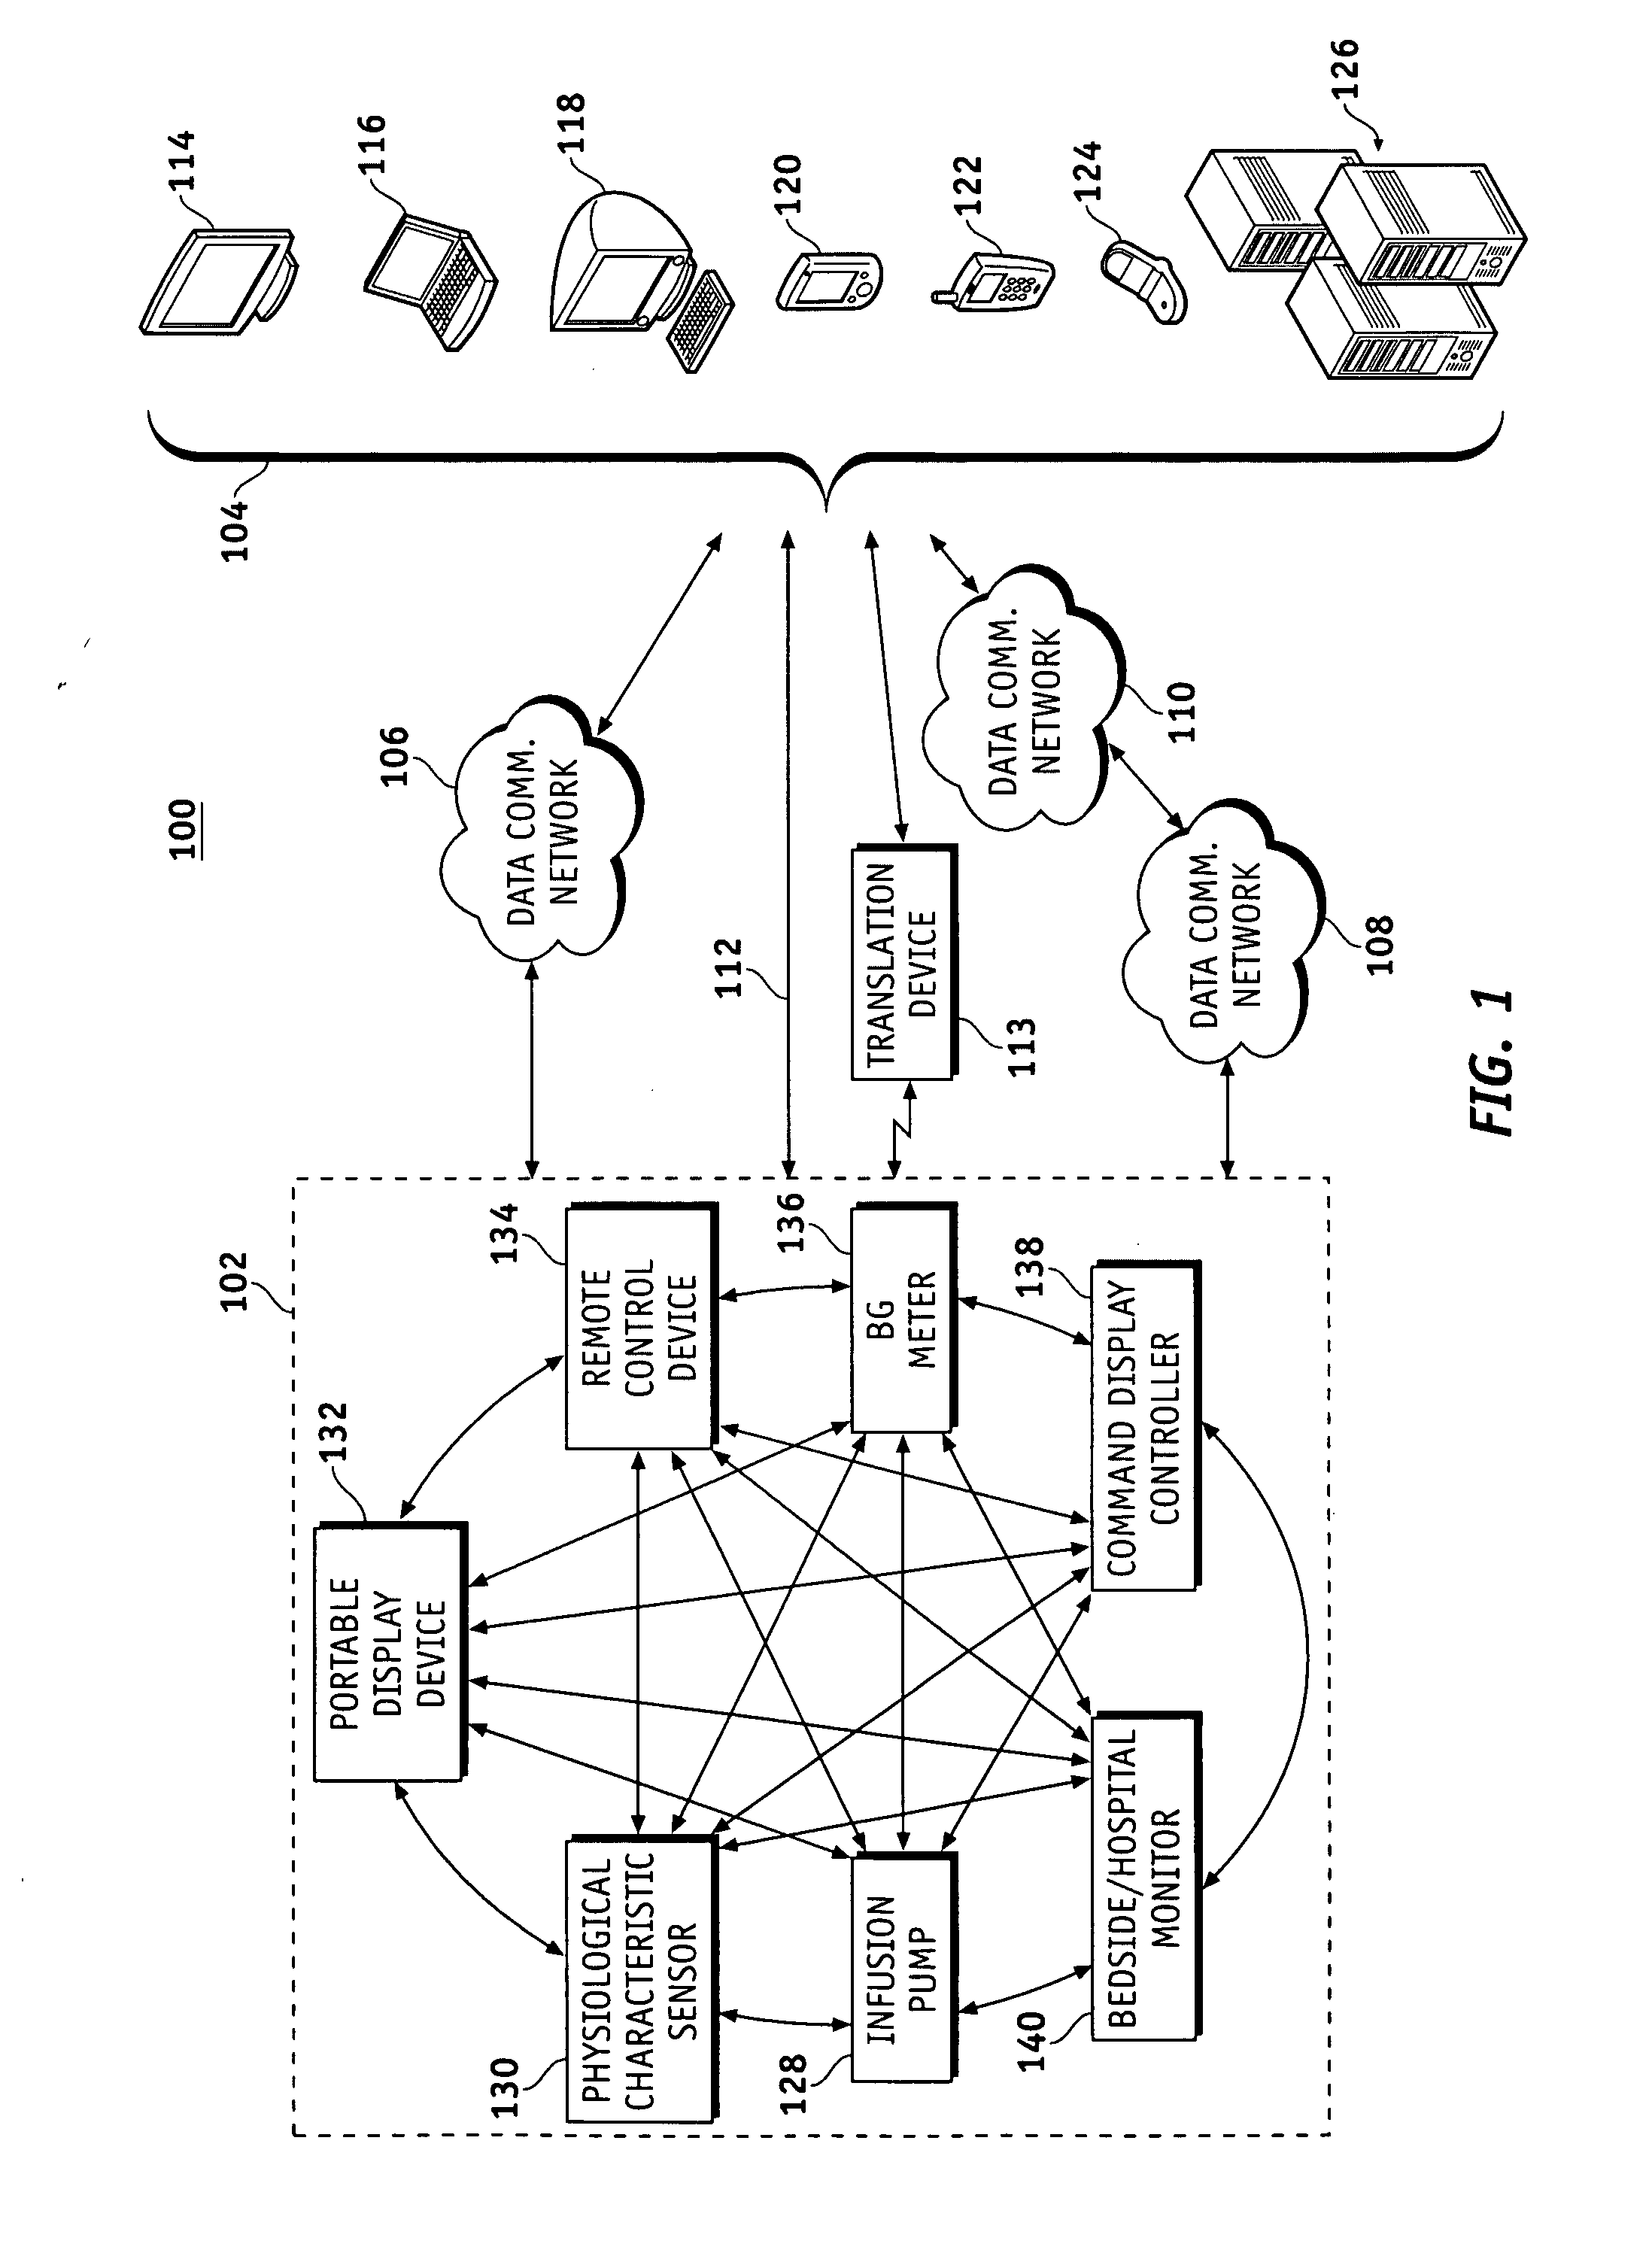 Data communication in networked fluid infusion systems